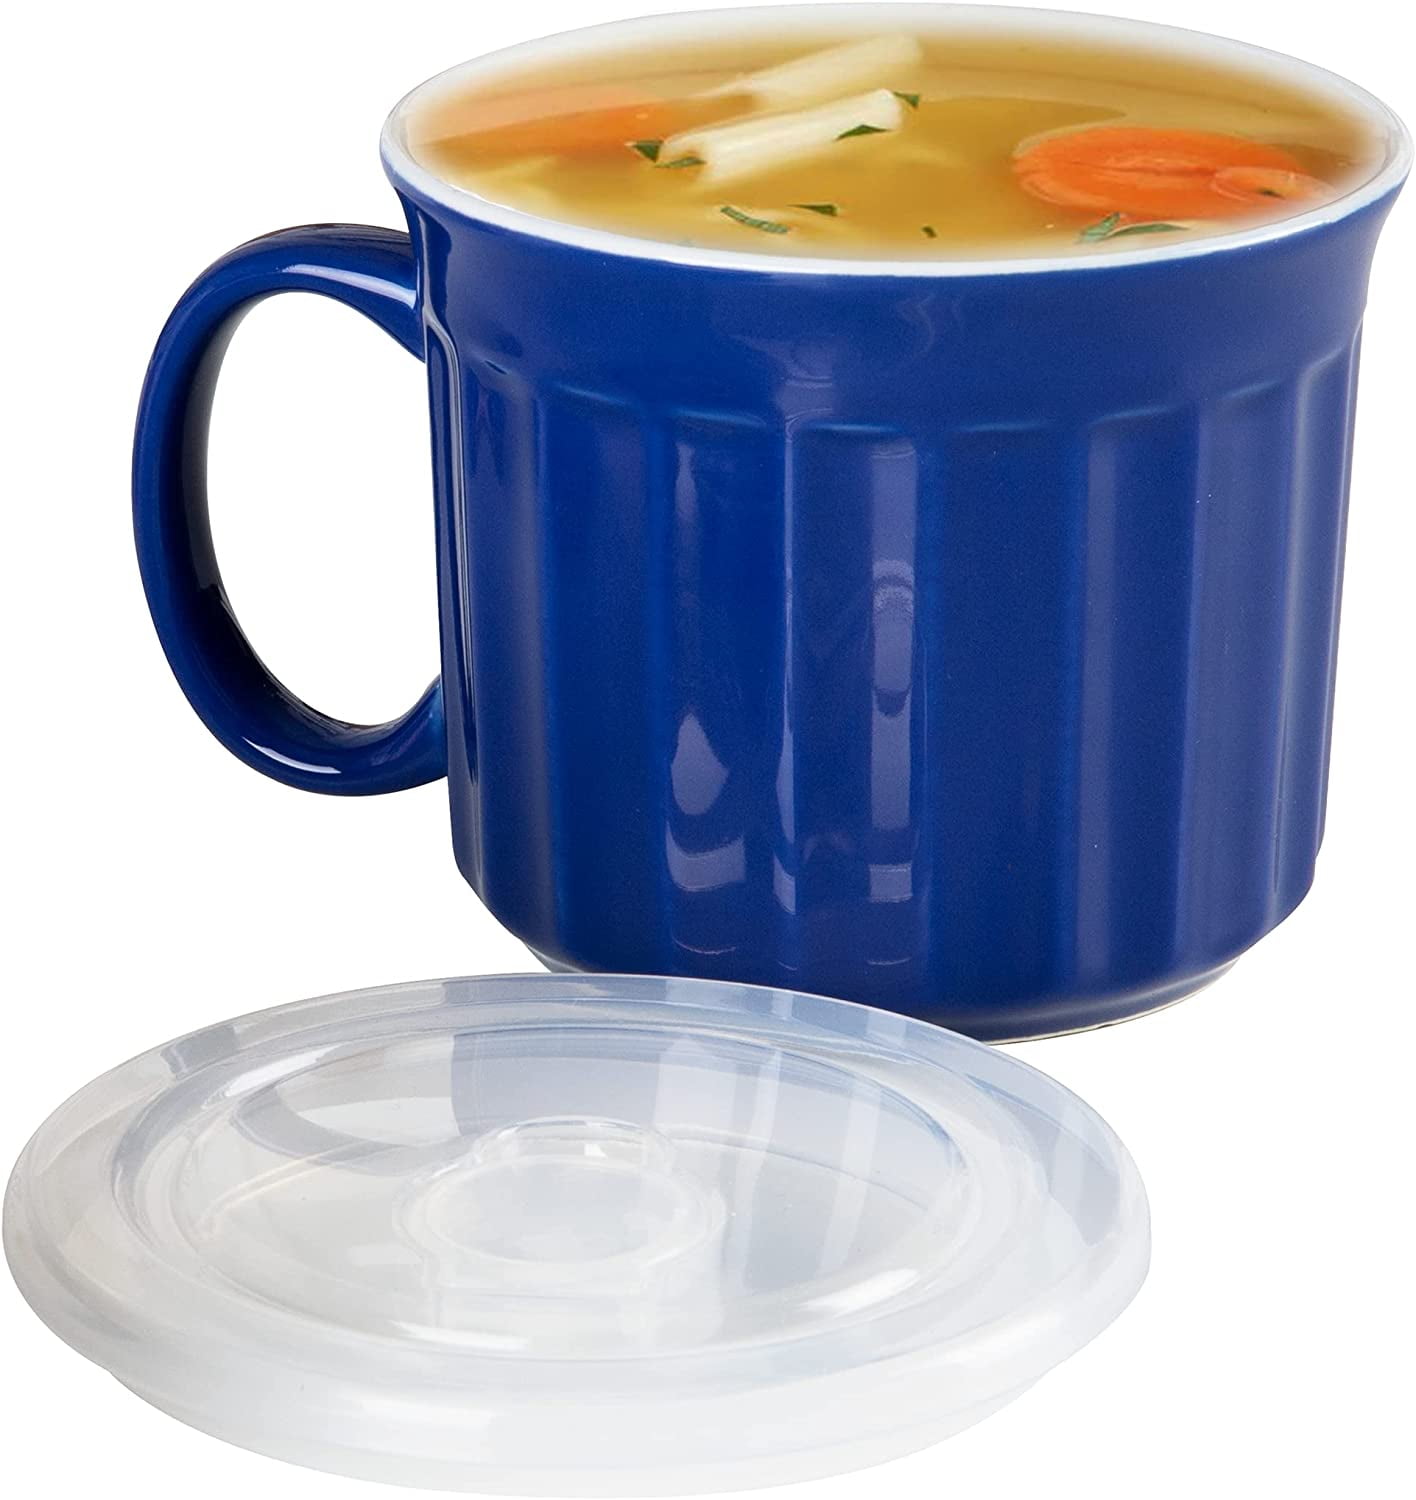 Home-X - Microwave Soup Mug Set with Secure Snap Close Vented Lids, 22 oz  Mugs Allow You to Heat and Eat Soups, Noodles, Hot Cereal and More in a